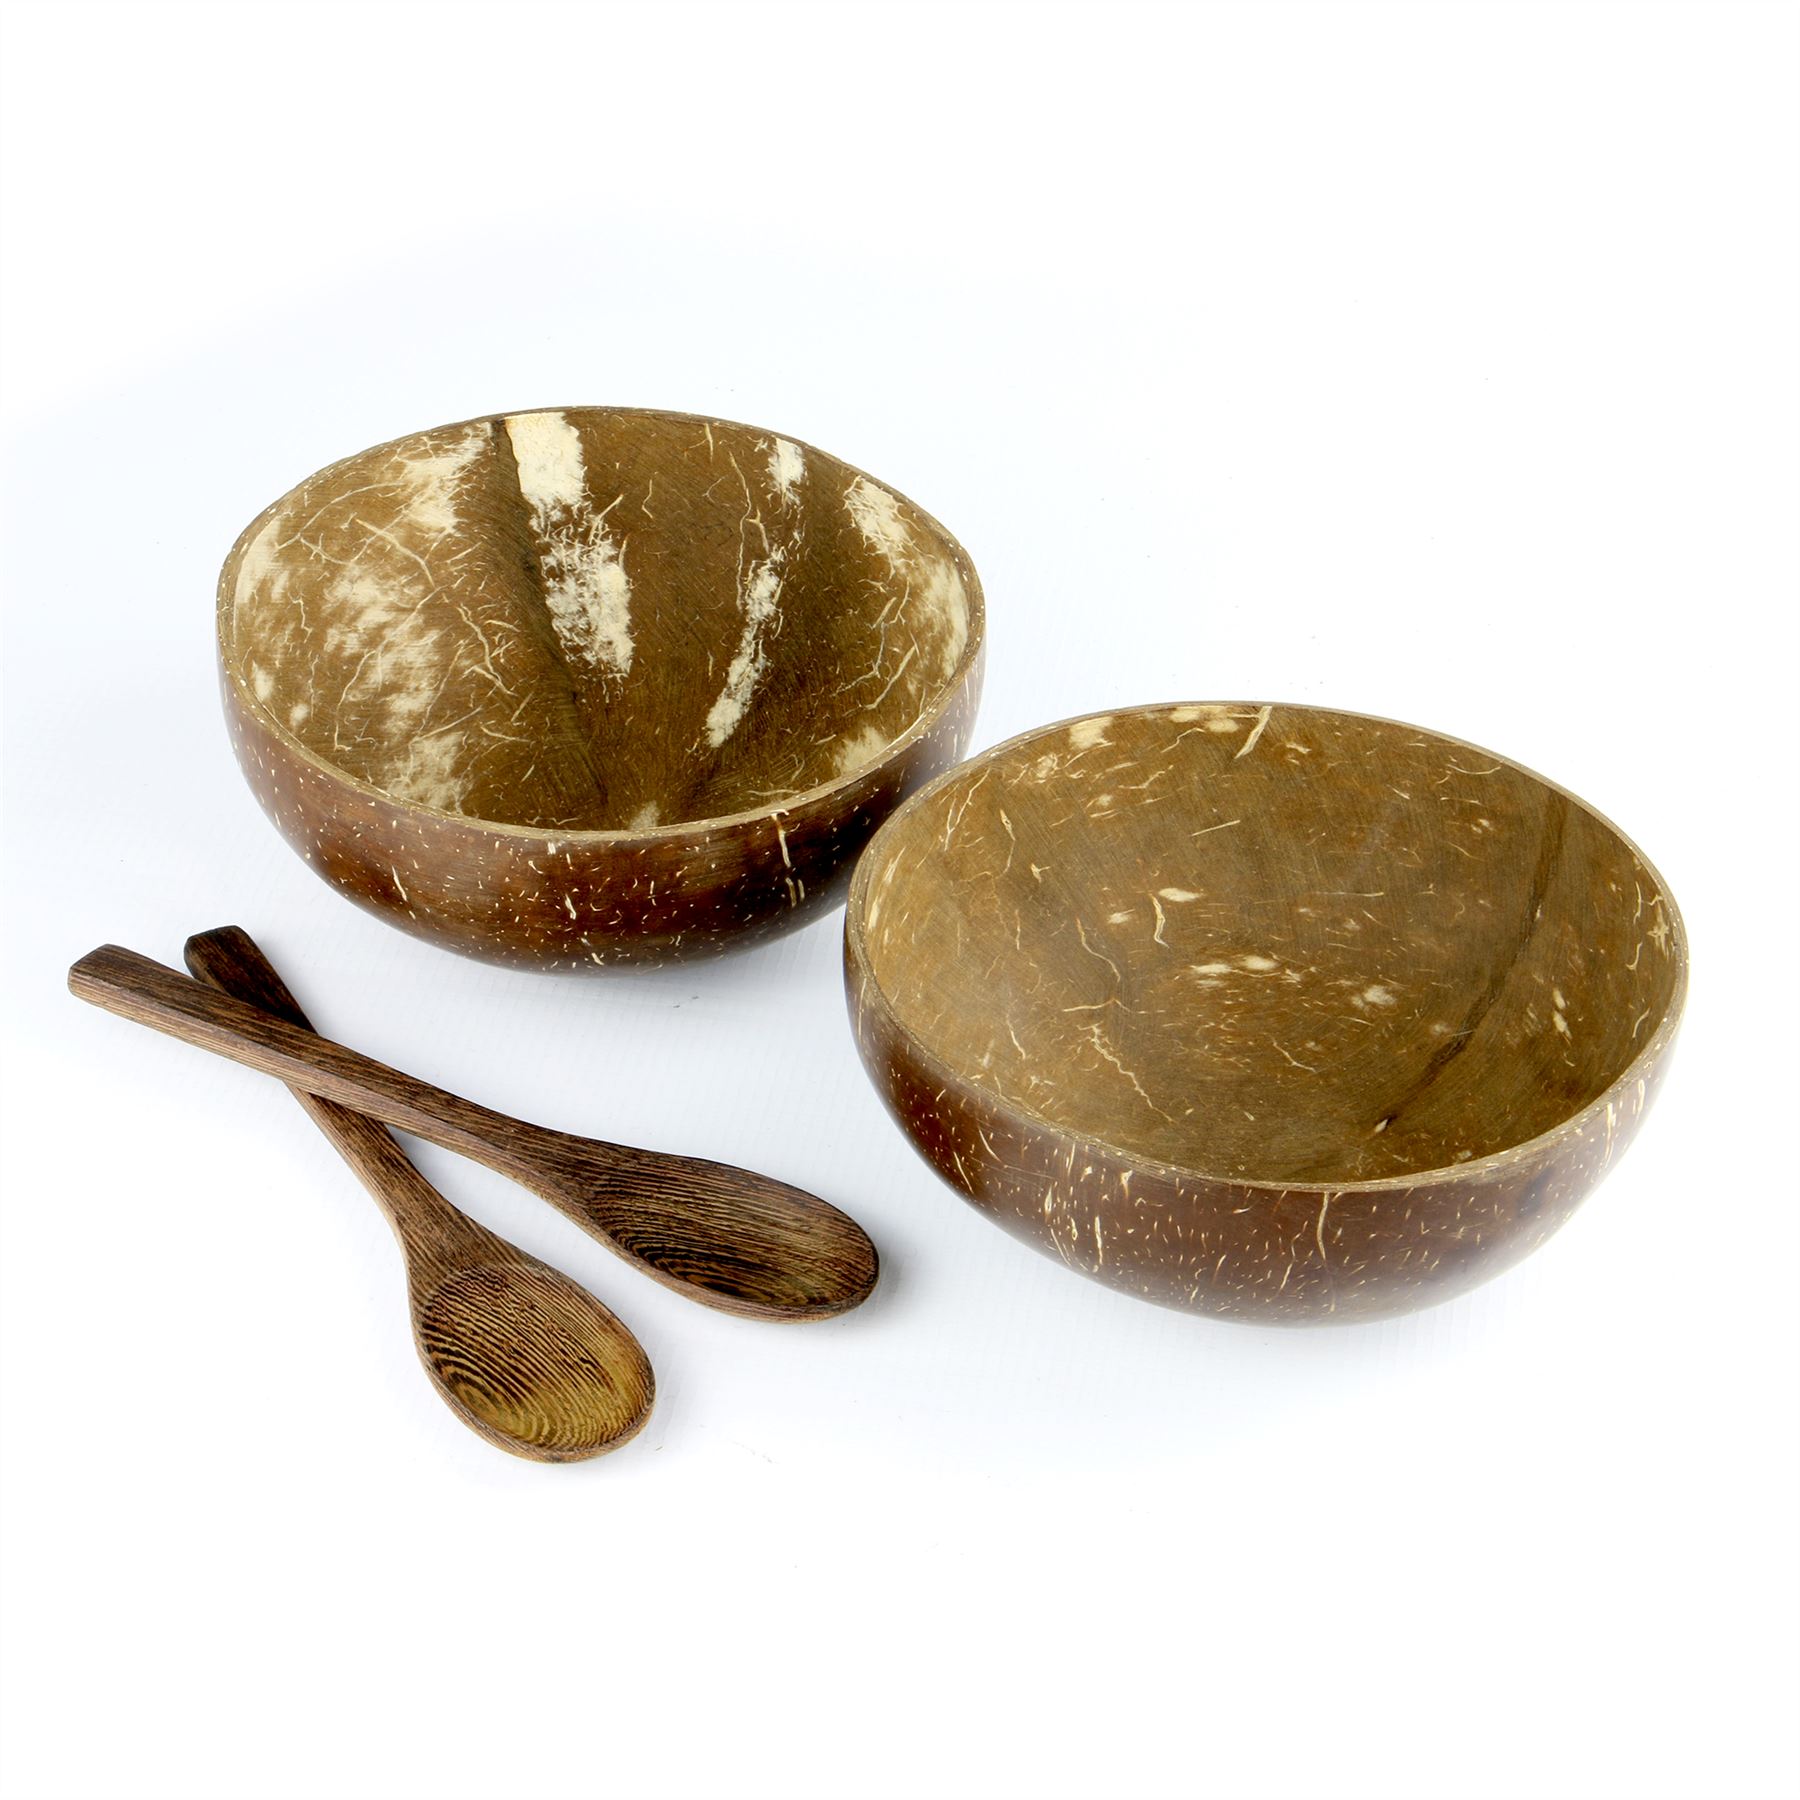 Natural Coconut Bowls - Pack of 2 | M&W